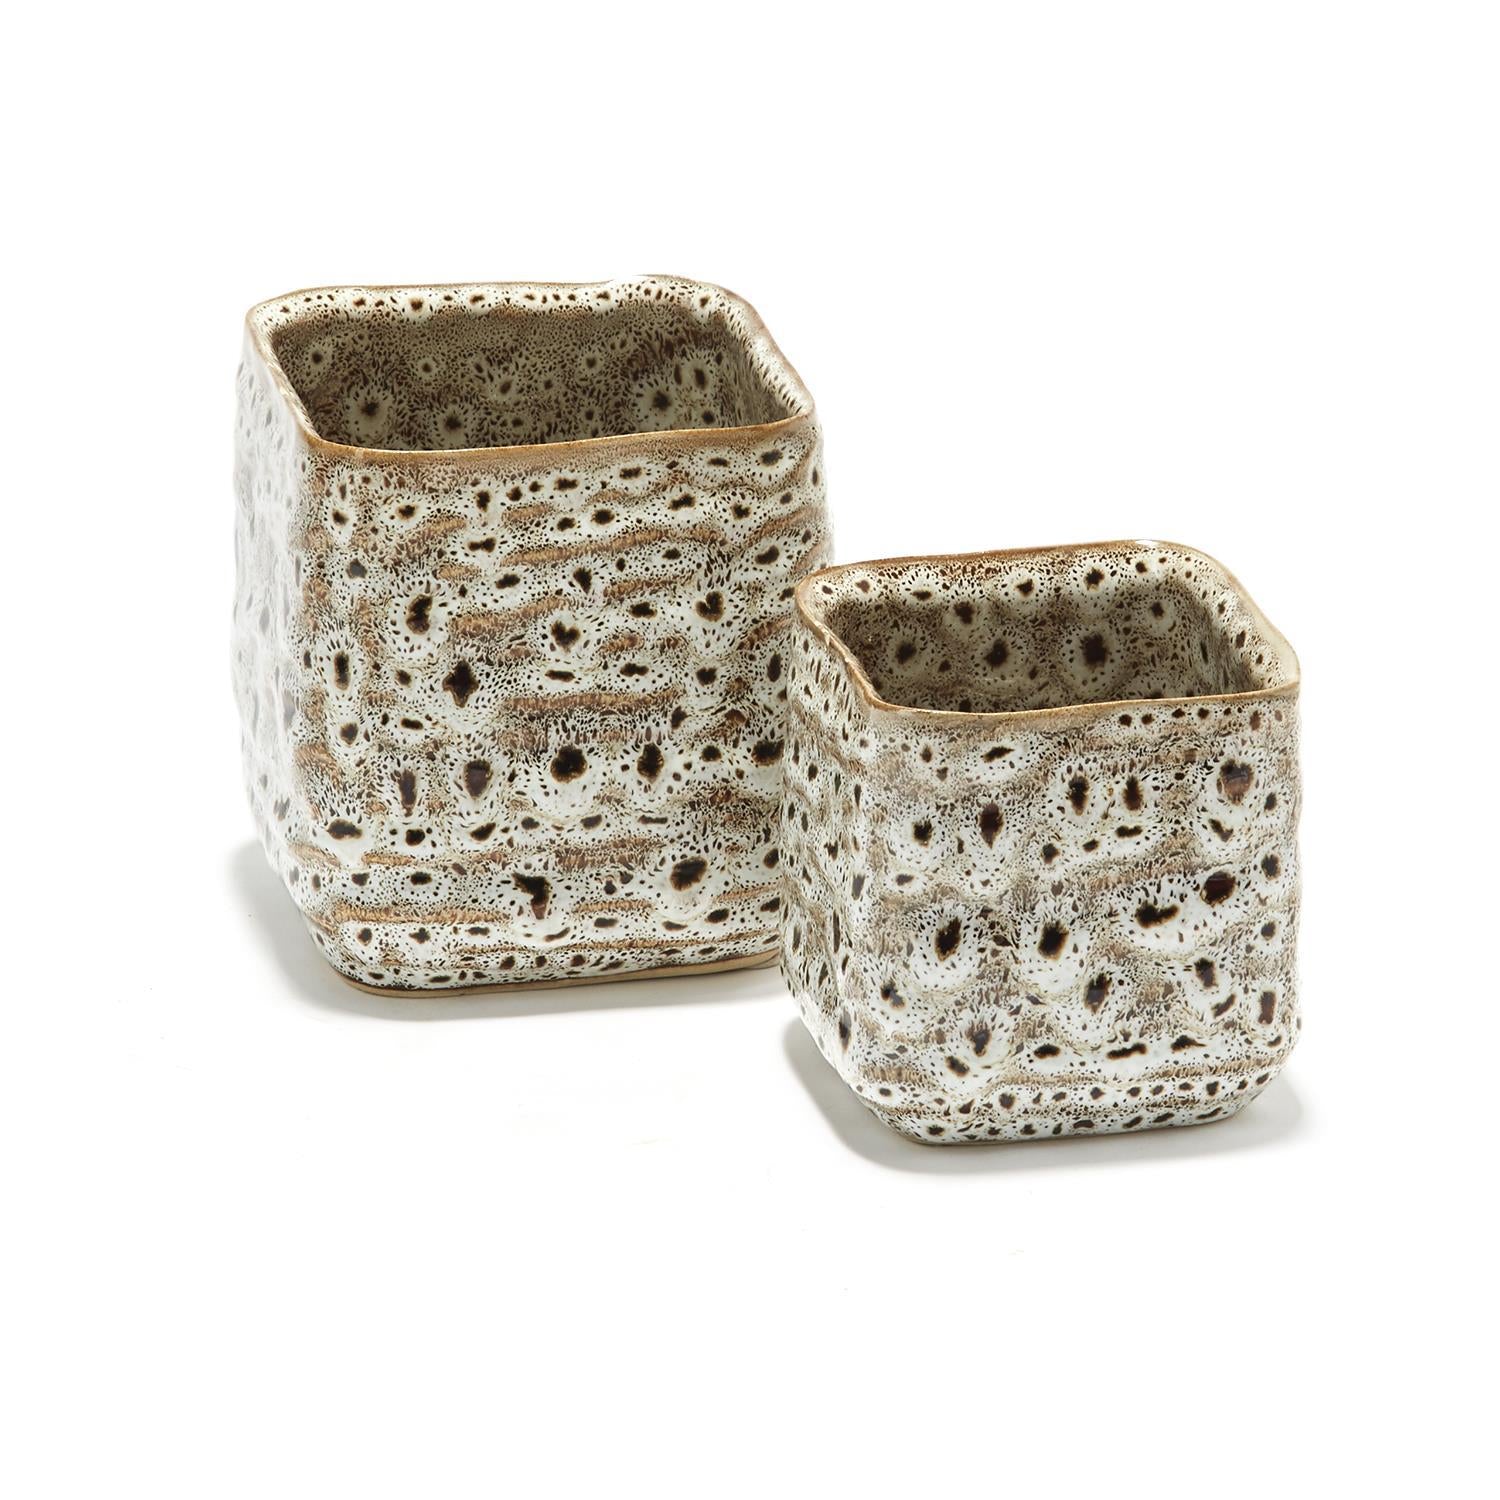 Katla Brown Speckled Hand-Crafted Ceramic Containers - Wanderlustre